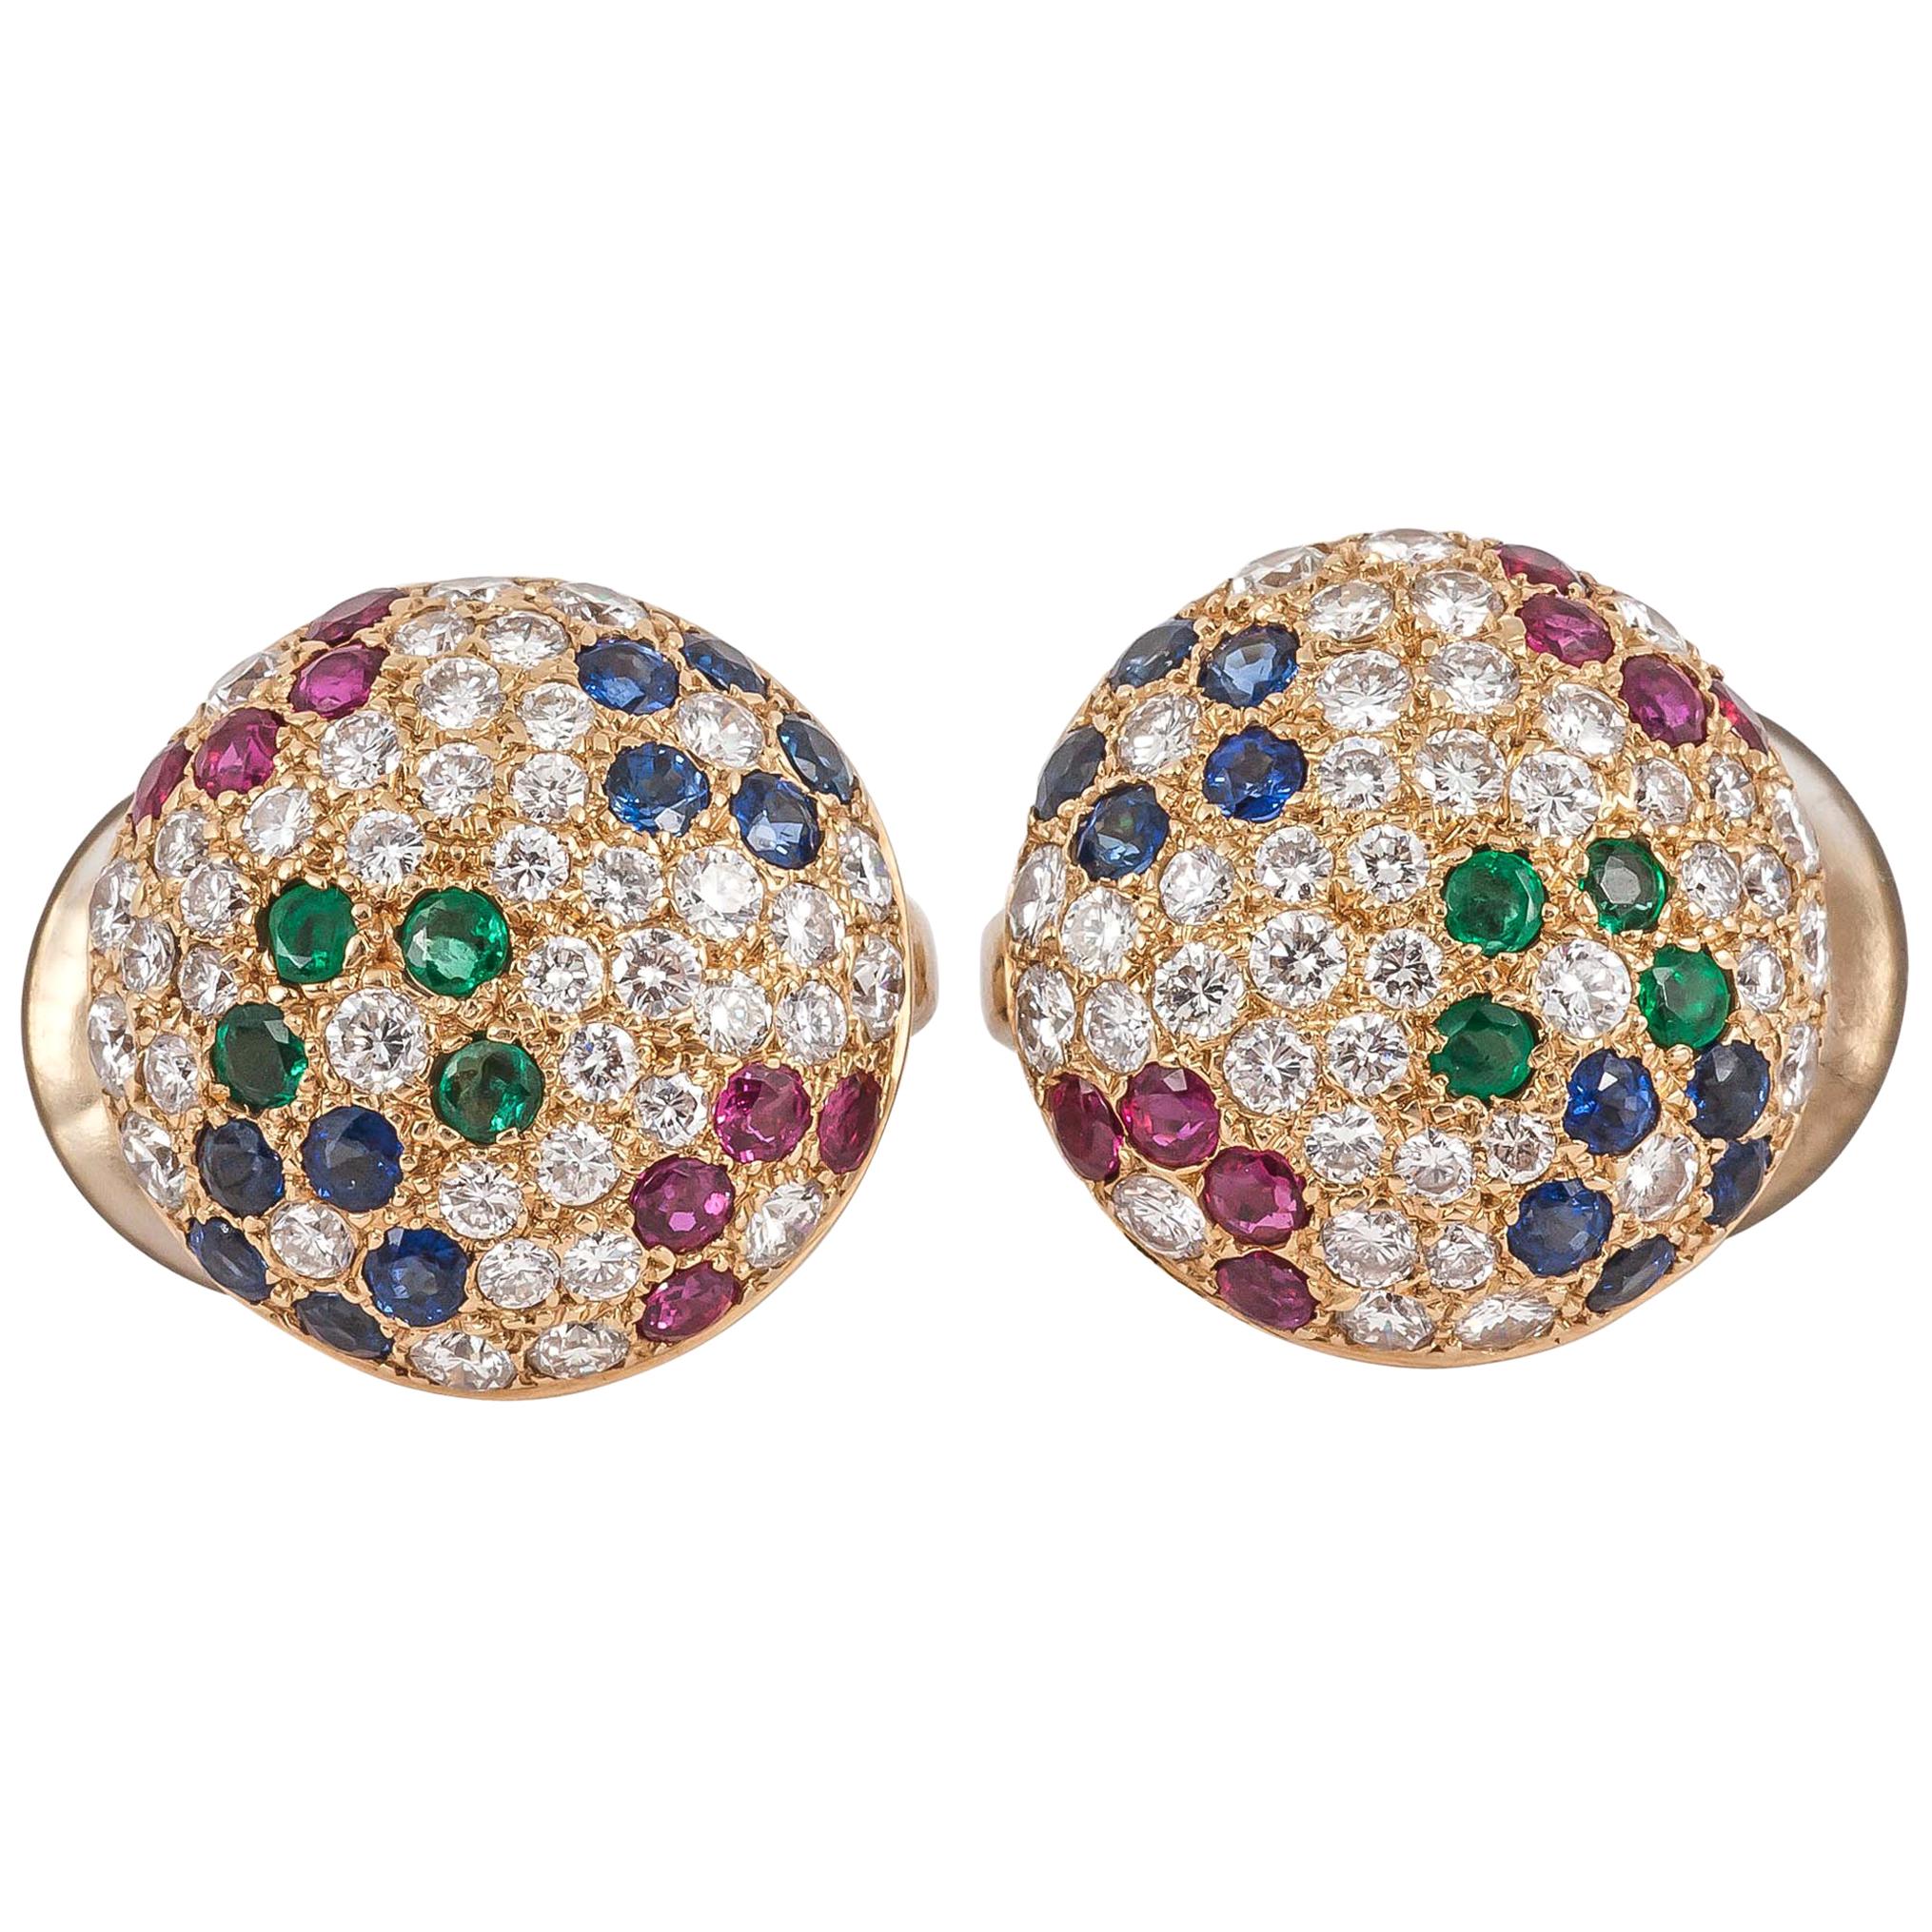 Earrings in 18 Karat Gold Pave Set Diamonds & Coloured Stones, French circa 1980 For Sale